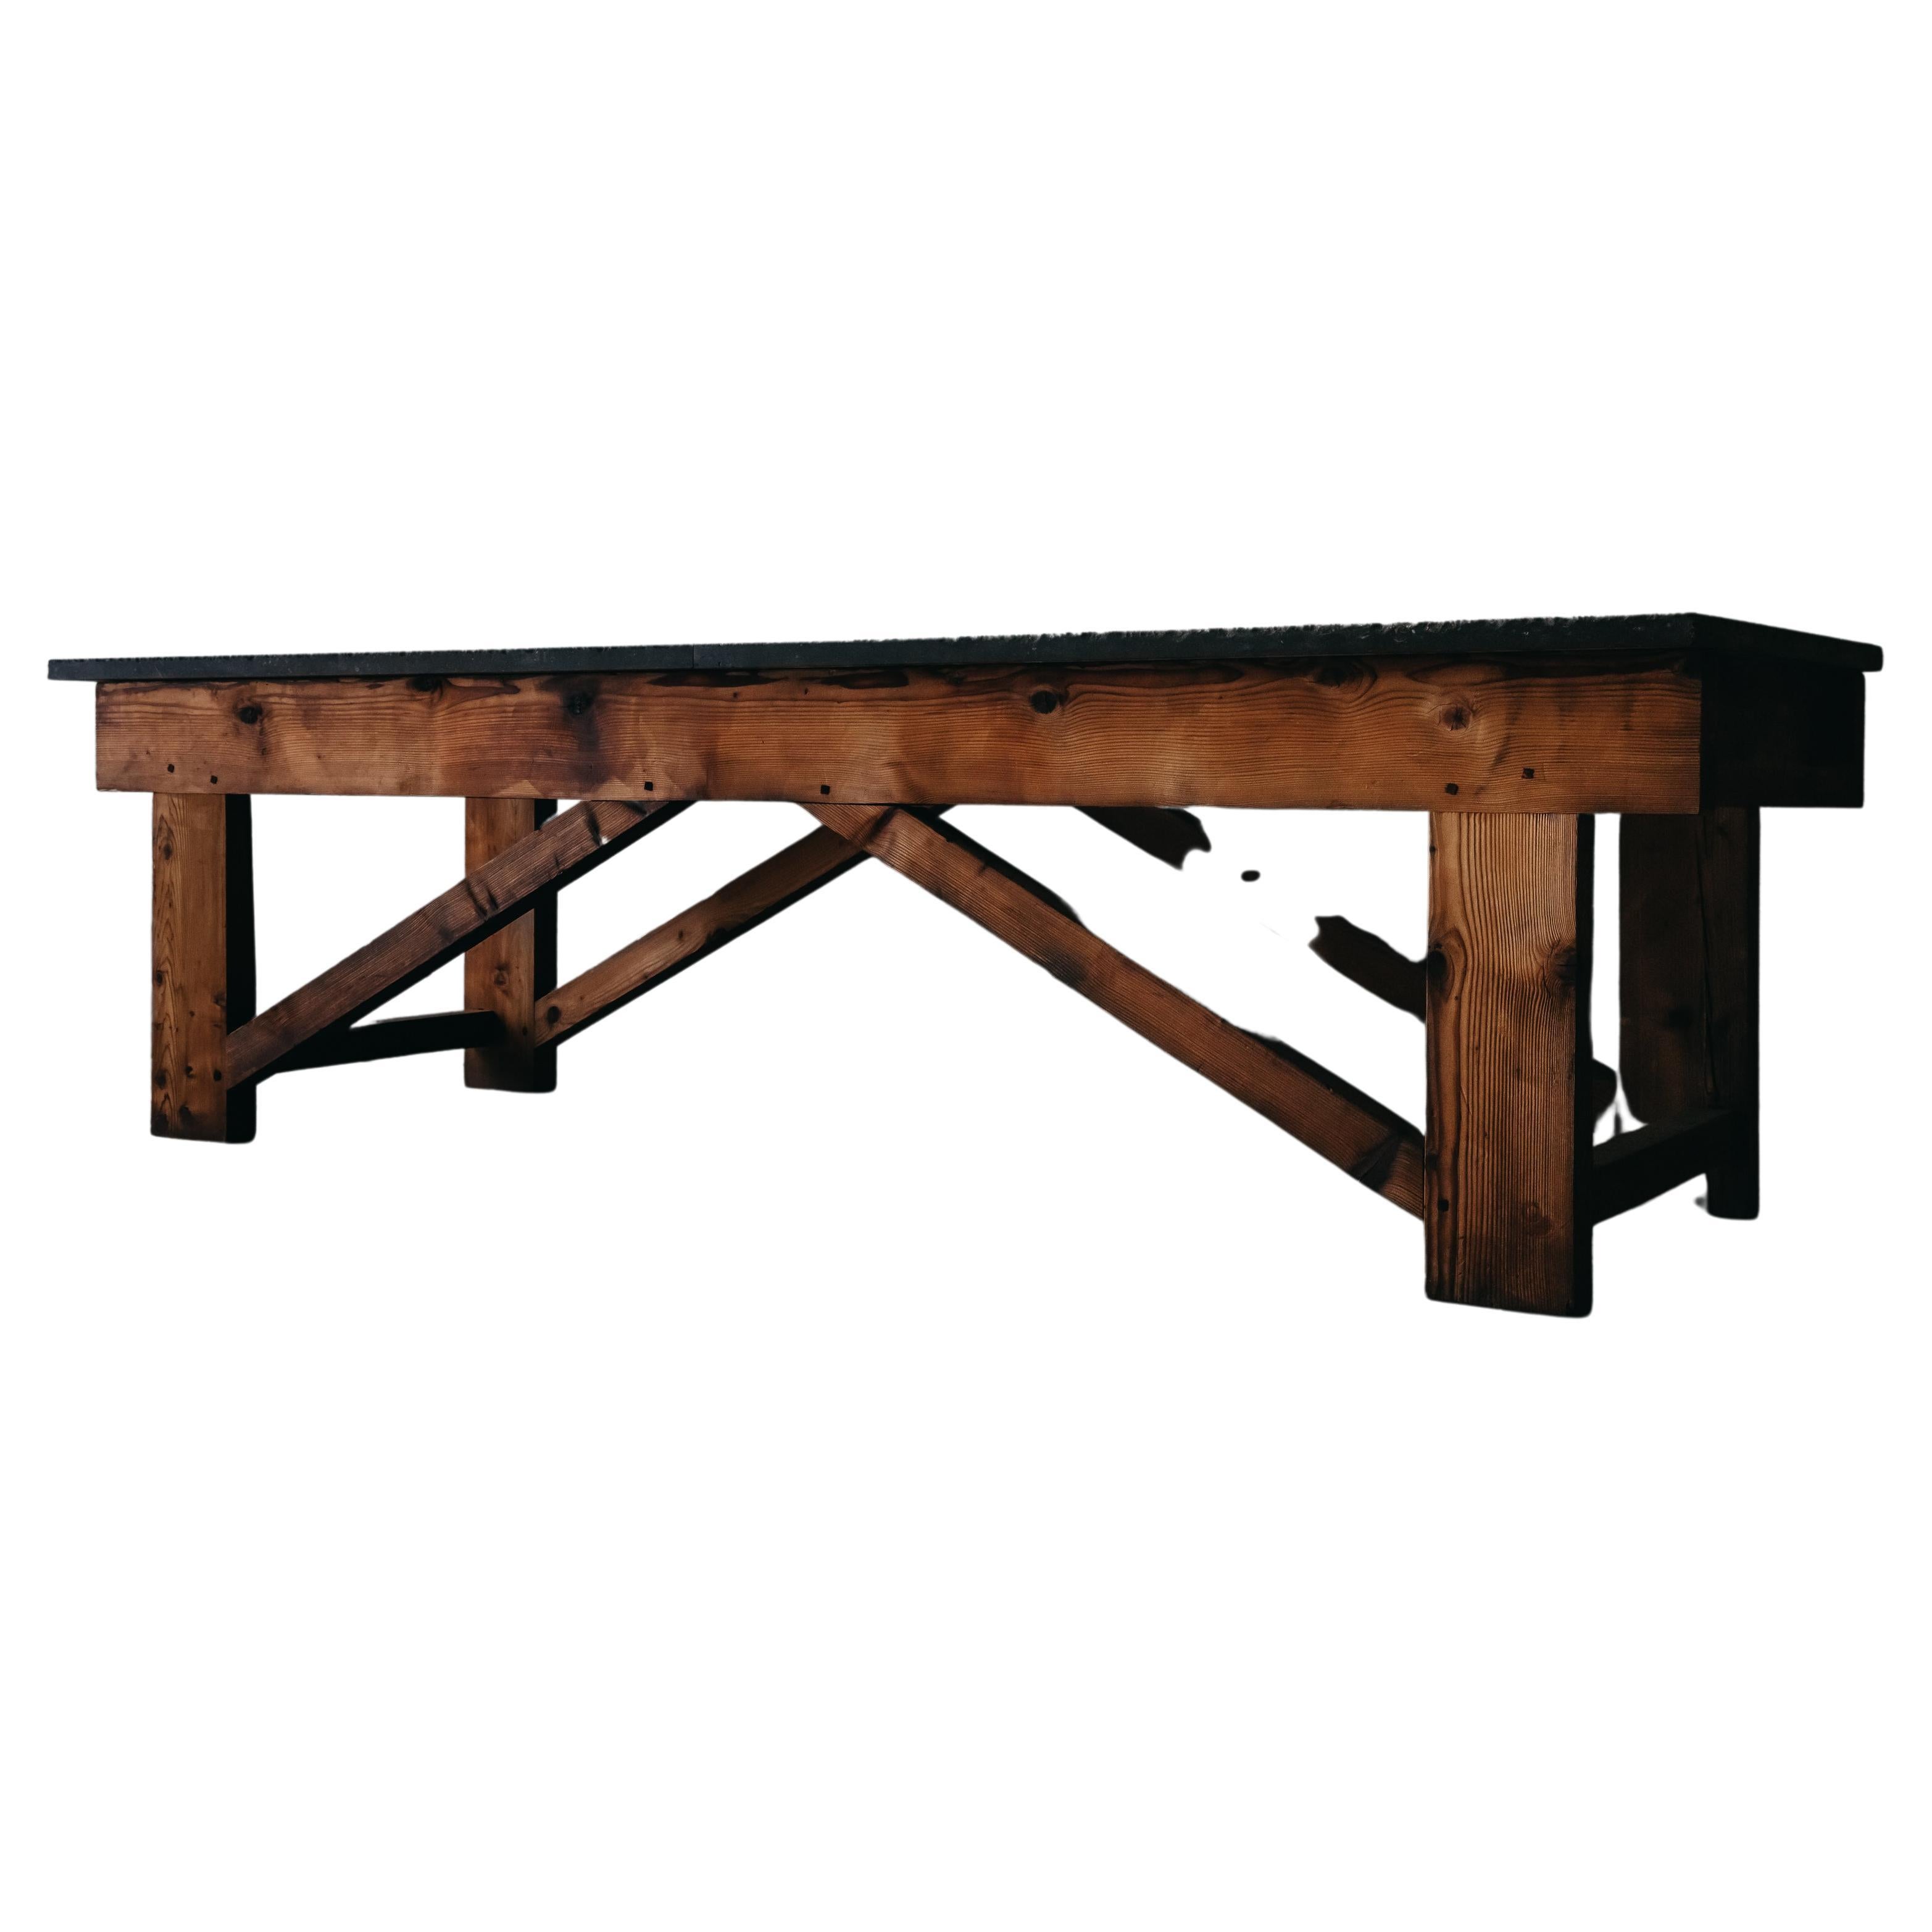 Vintage Xl Stone Console Table from France, circa 1940